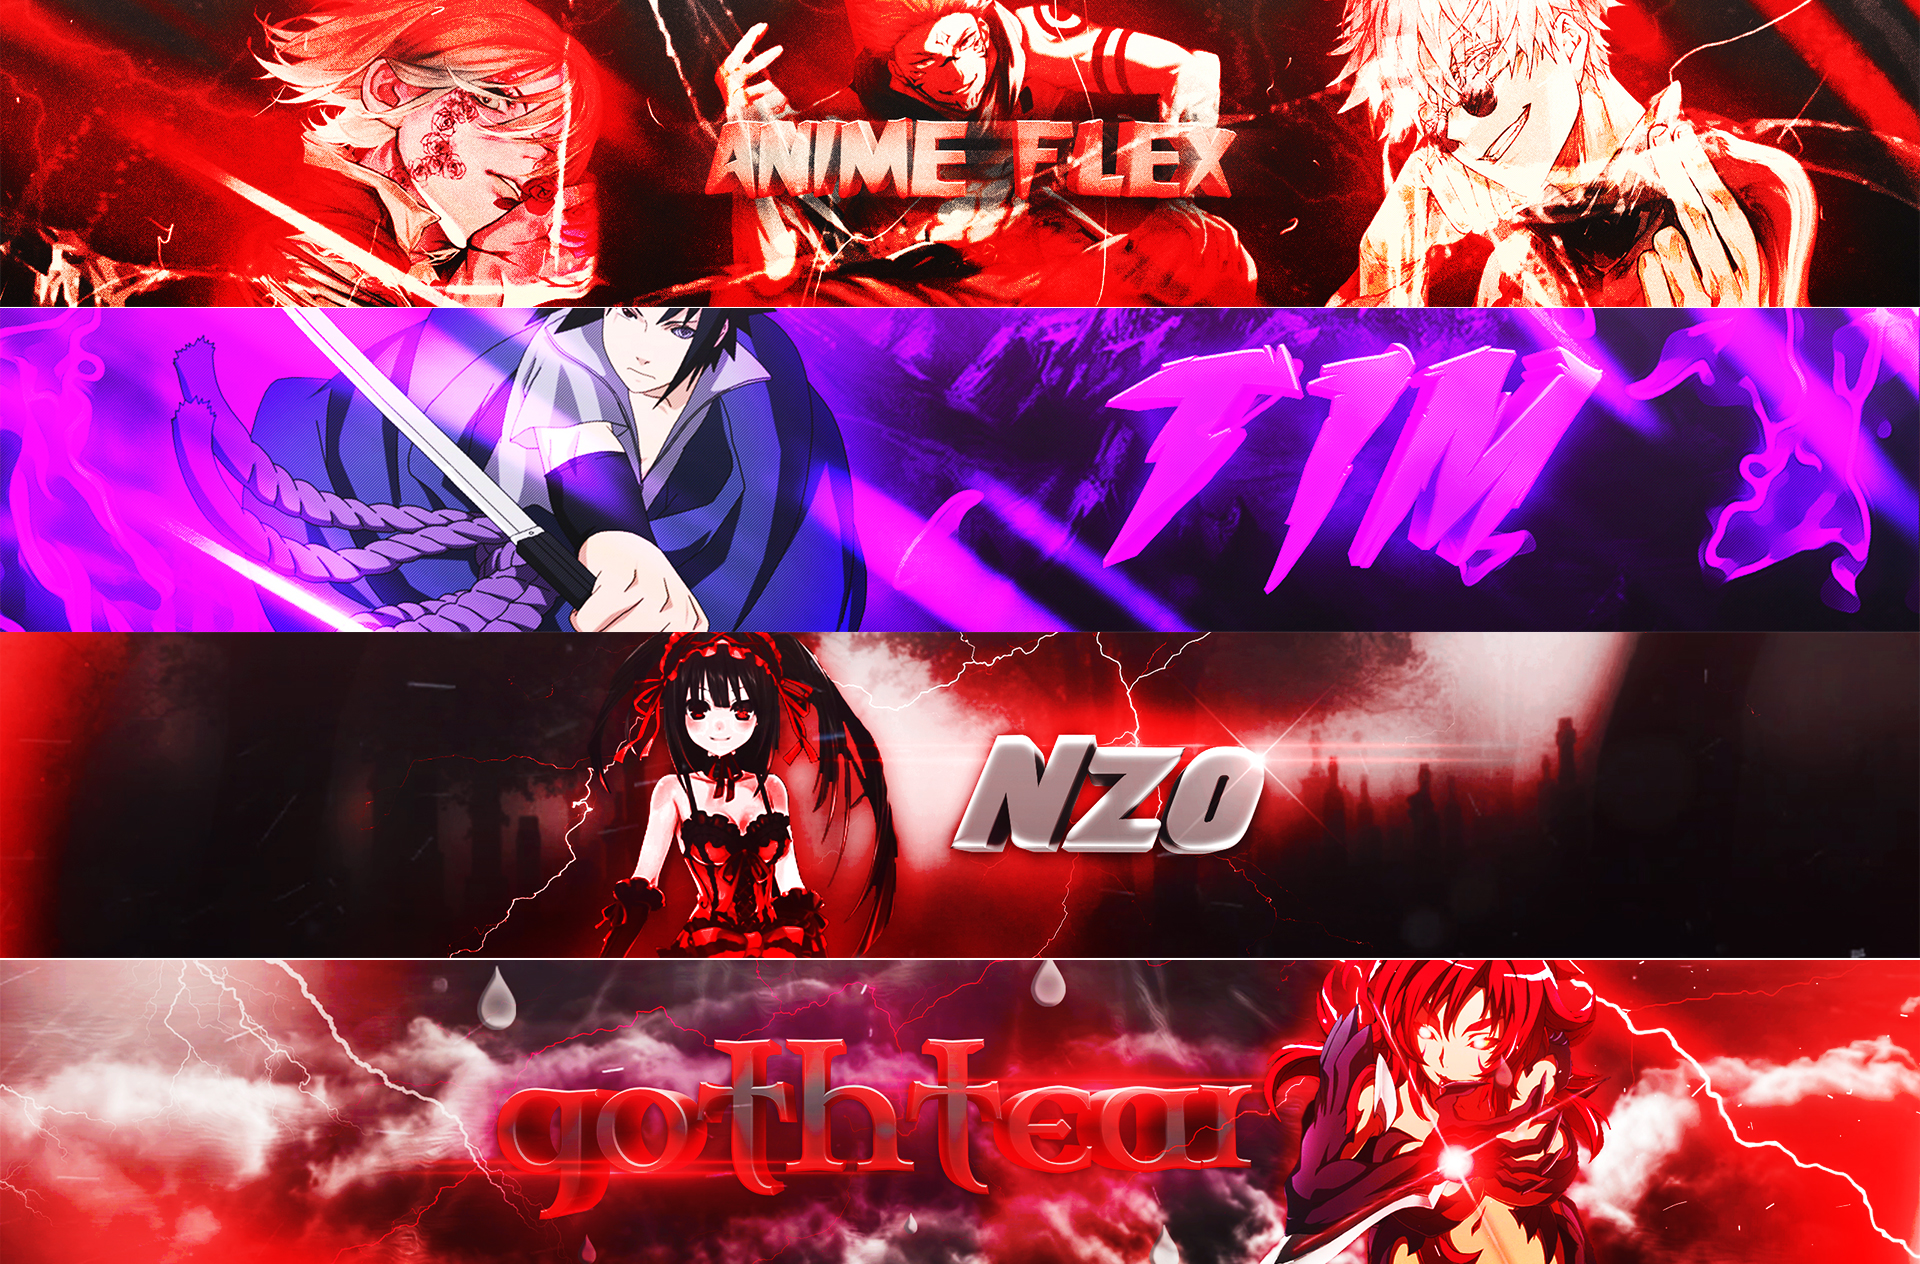 Another anime banner by me!!! (dm me if u want something similar) : r/pixlr